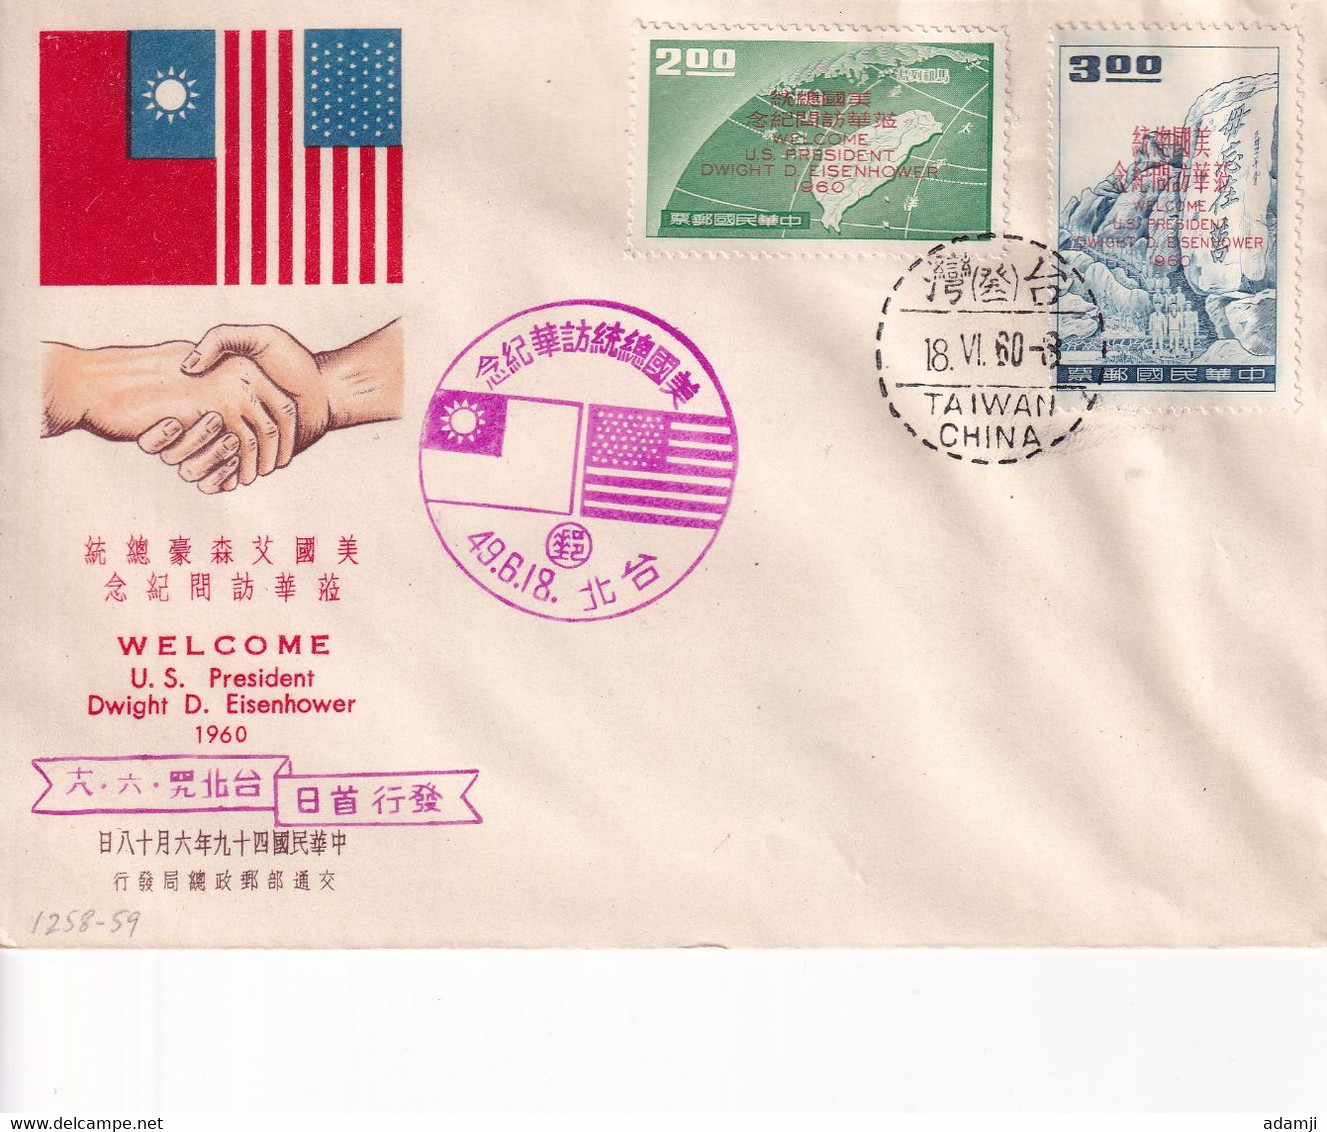 TAIWAN 1960 U.S. President Dwight VISIT TO TAIWAN FDC VERY FINE CONDITION. - Covers & Documents